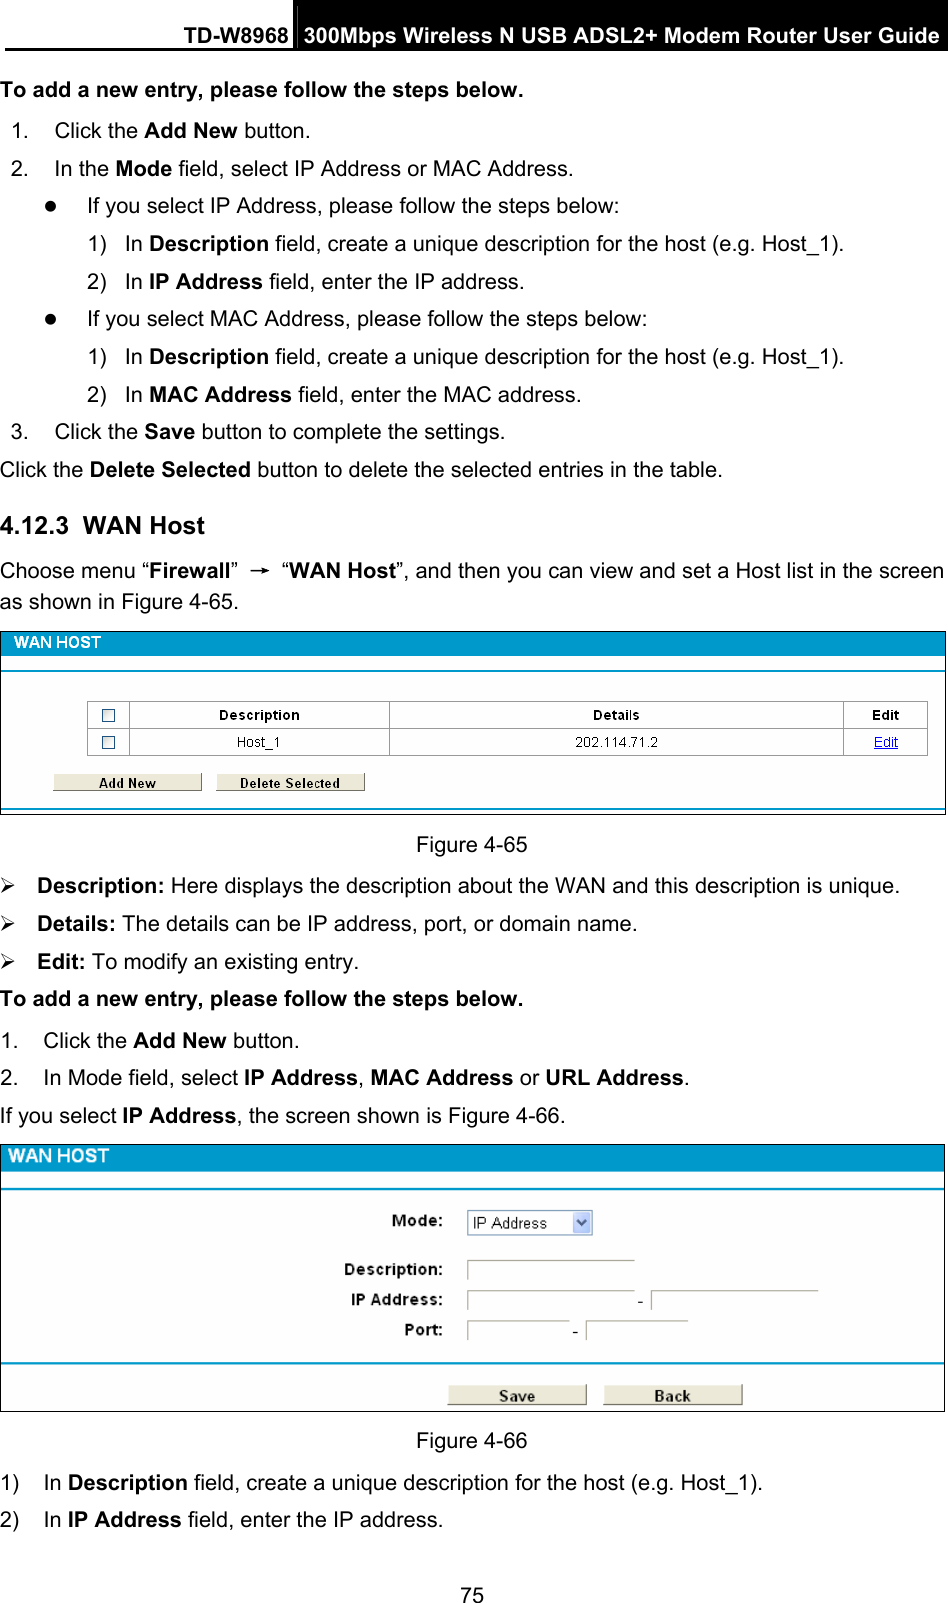 TD-W8968  300Mbps Wireless N USB ADSL2+ Modem Router User Guide 75 To add a new entry, please follow the steps below. 1. Click the Add New button. 2. In the Mode field, select IP Address or MAC Address. z If you select IP Address, please follow the steps below:   1) In Description field, create a unique description for the host (e.g. Host_1).   2) In IP Address field, enter the IP address. z If you select MAC Address, please follow the steps below:   1) In Description field, create a unique description for the host (e.g. Host_1). 2) In MAC Address field, enter the MAC address. 3. Click the Save button to complete the settings. Click the Delete Selected button to delete the selected entries in the table. 4.12.3  WAN Host Choose menu “Firewall” → “WAN Host”, and then you can view and set a Host list in the screen as shown in Figure 4-65.  Figure 4-65 ¾ Description: Here displays the description about the WAN and this description is unique.   ¾ Details: The details can be IP address, port, or domain name.   ¾ Edit: To modify an existing entry.   To add a new entry, please follow the steps below. 1. Click the Add New button. 2.  In Mode field, select IP Address, MAC Address or URL Address. If you select IP Address, the screen shown is Figure 4-66.  Figure 4-66 1) In Description field, create a unique description for the host (e.g. Host_1).   2) In IP Address field, enter the IP address. 